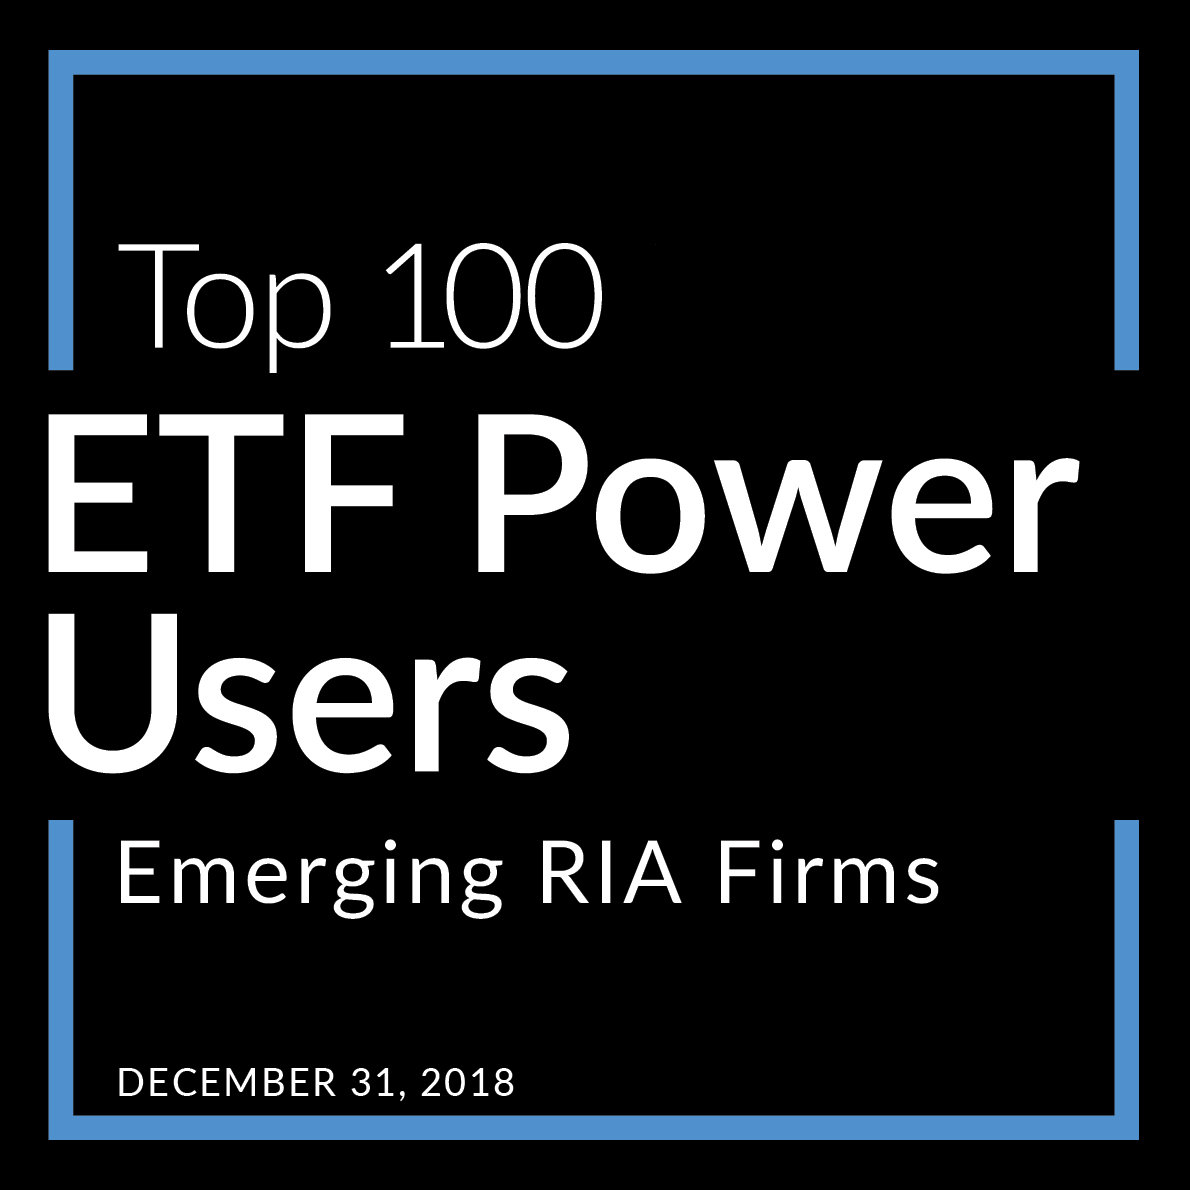 RIA Channel Announces 2023 Top 100 RIA ETF Power Users Ranking